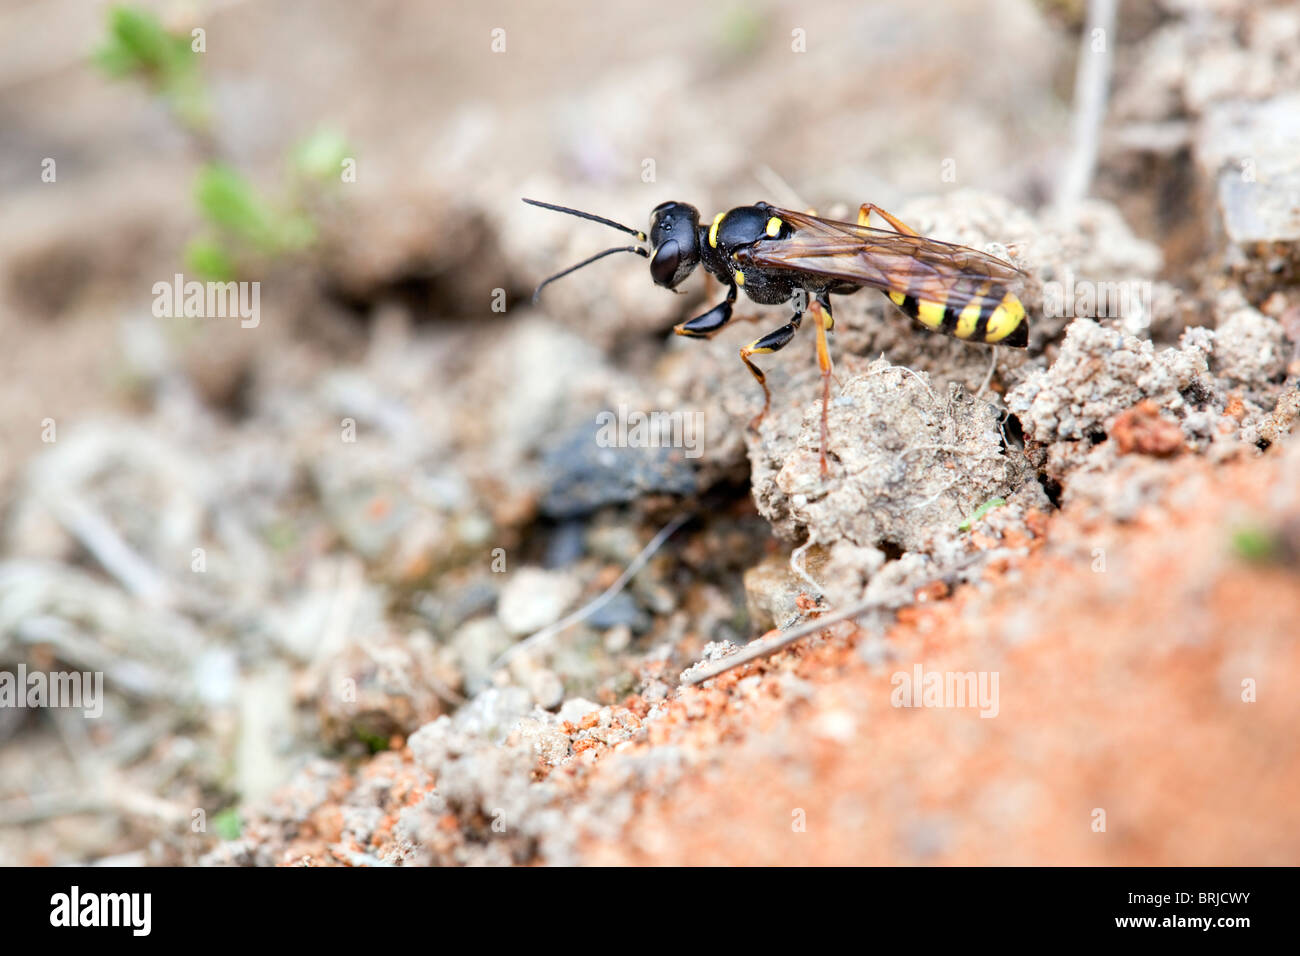 Digger Wasp ; Mellinus arvensis ; déchets miniers ; Godolphin, Cornwall Banque D'Images